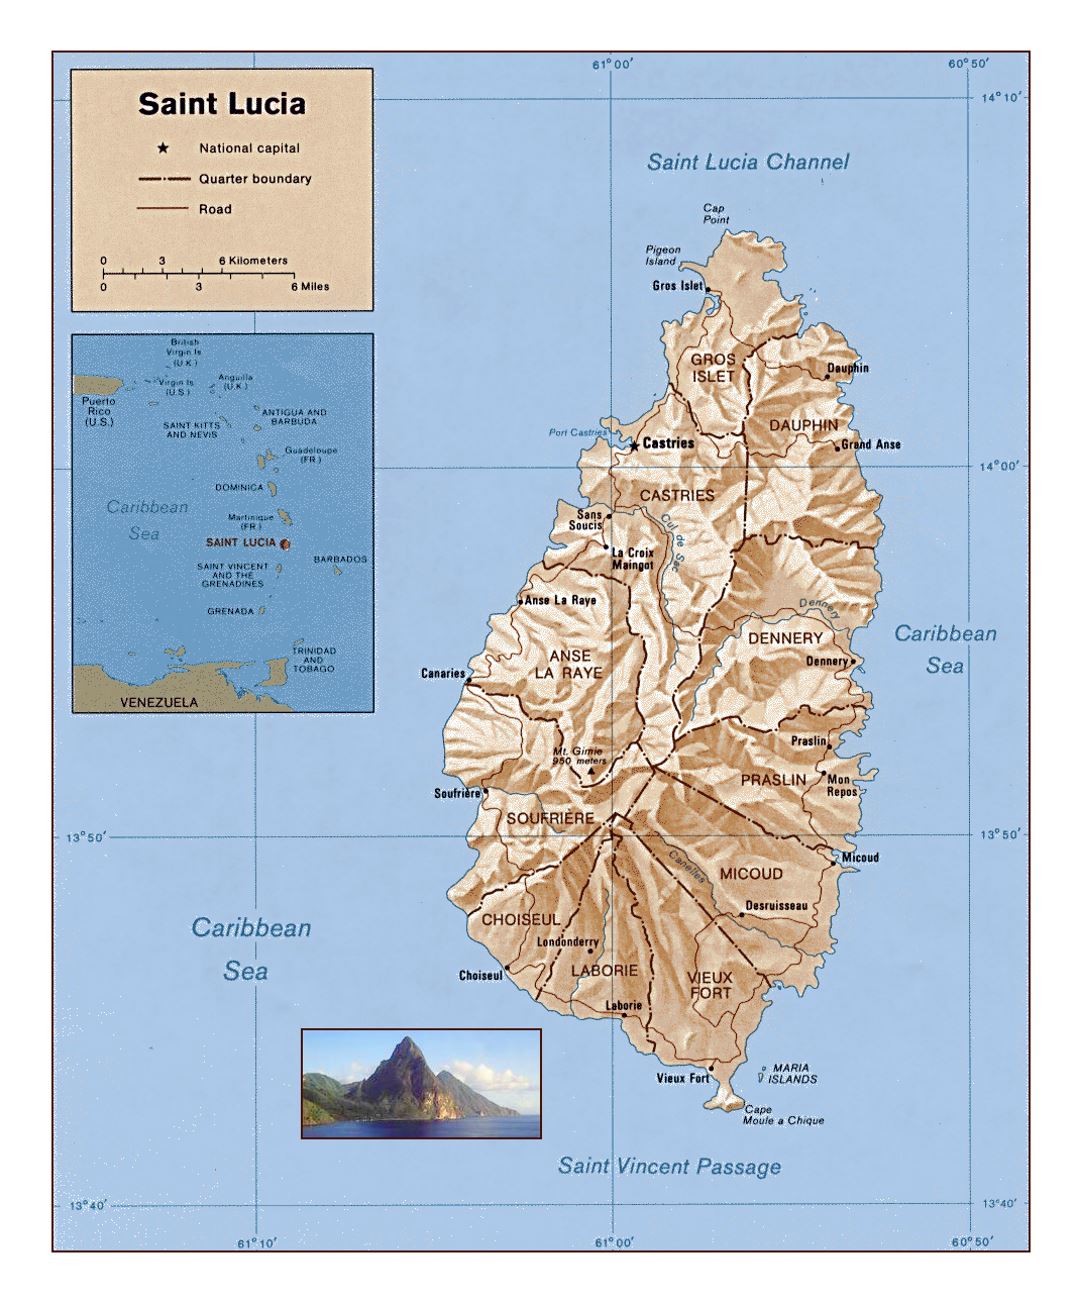 Detailed political and administrative map of Saint Lucia with relief and other marks